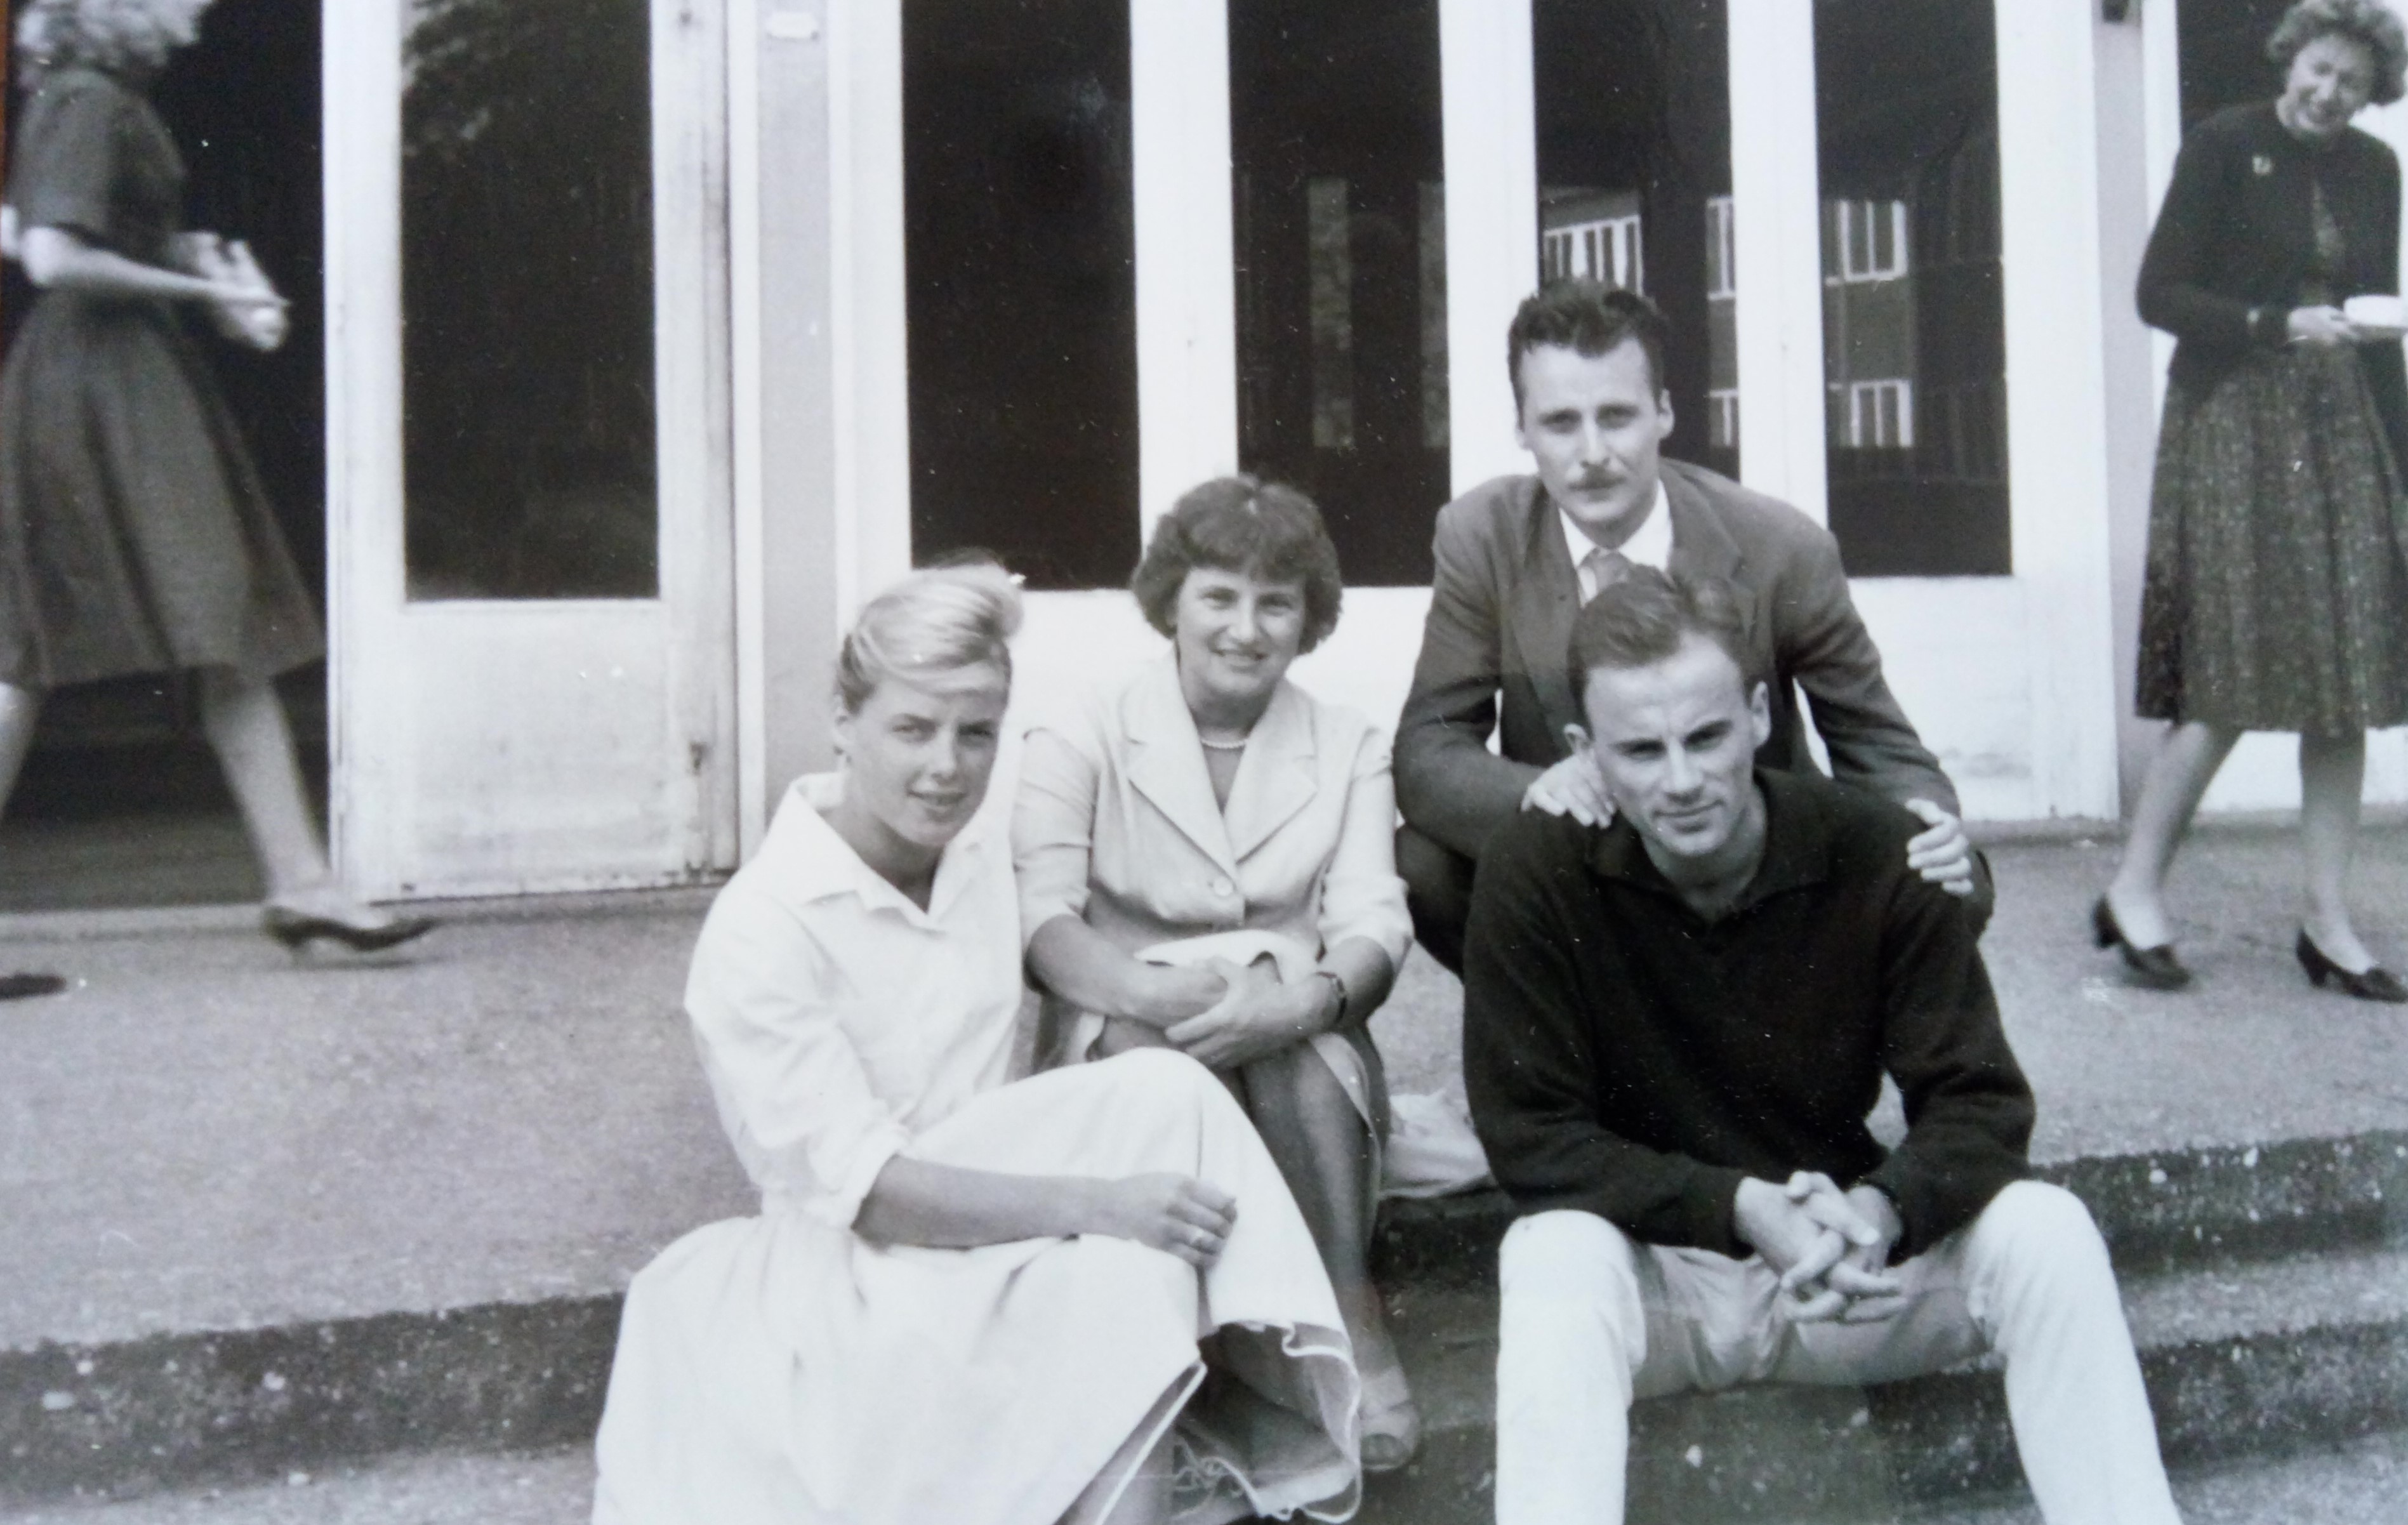 The Kušans (Zdenka and Jakša above) and Salajs (Barbara and Branko in front) at the summer seminar of the Free European University in Exile, 1959-1961, Jakša Kušan Personal Papers